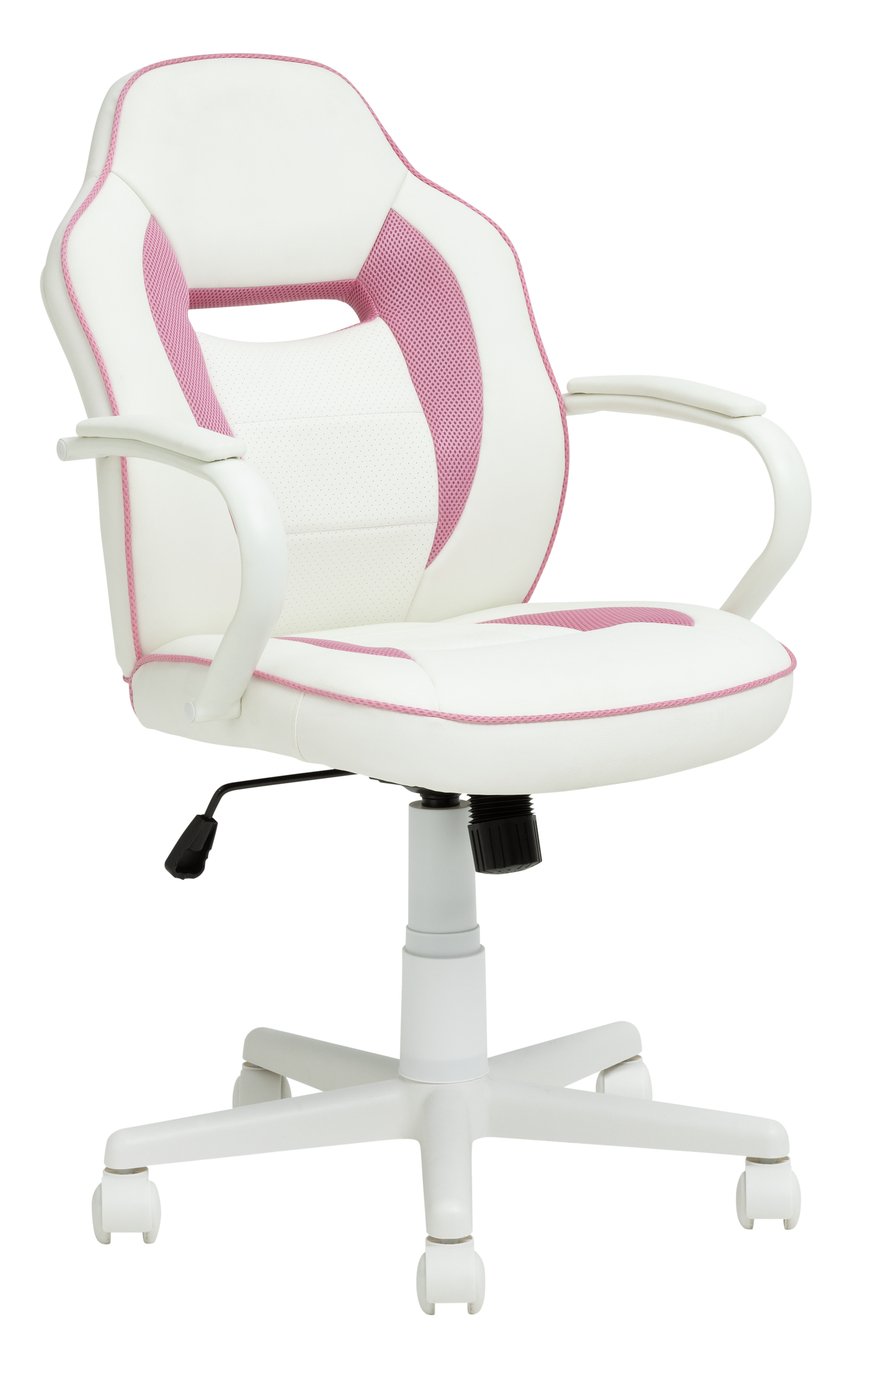 Argos Home Faux Leather Mid Back Gaming Chair - White & Pink